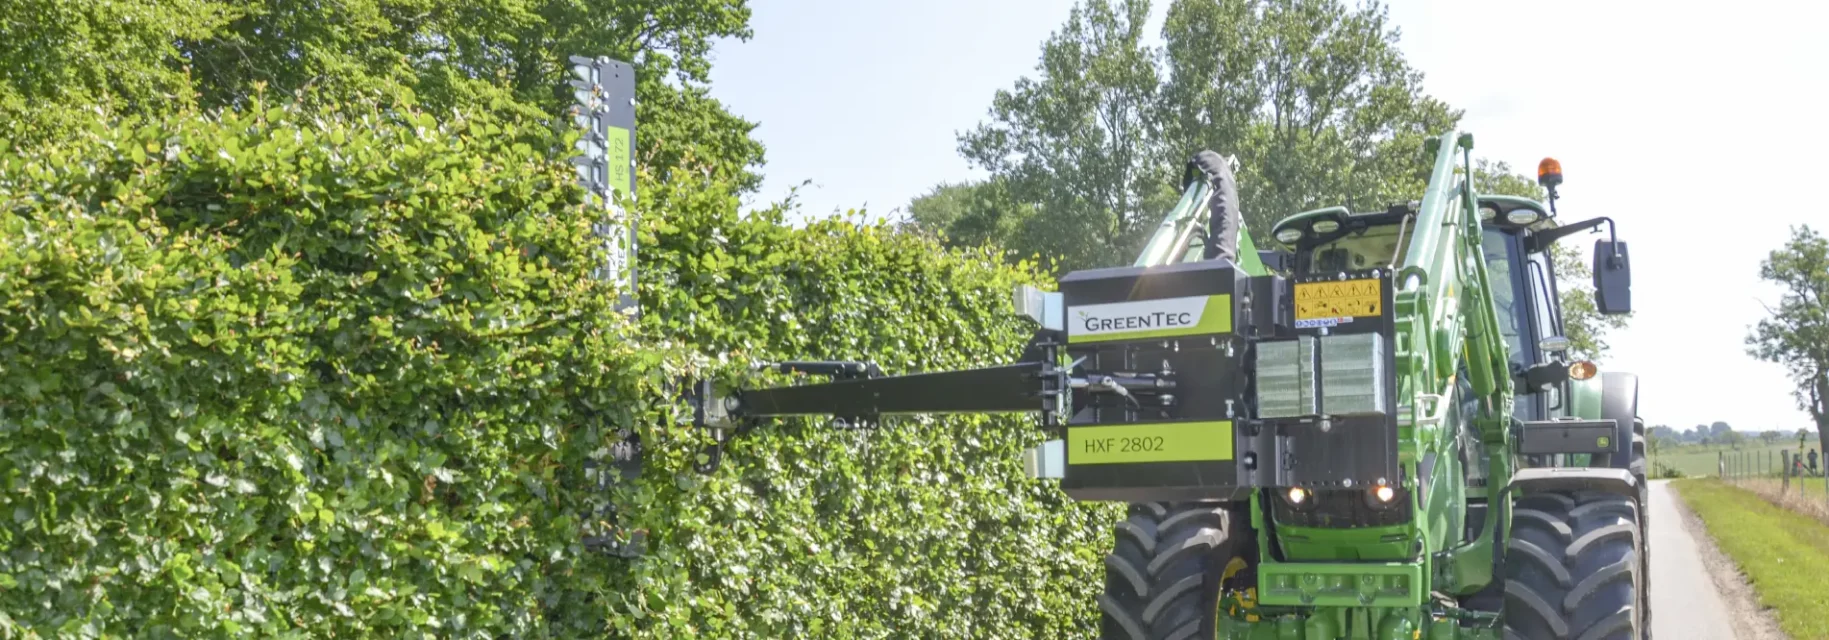 Hedge trimmer front mounted on tractor